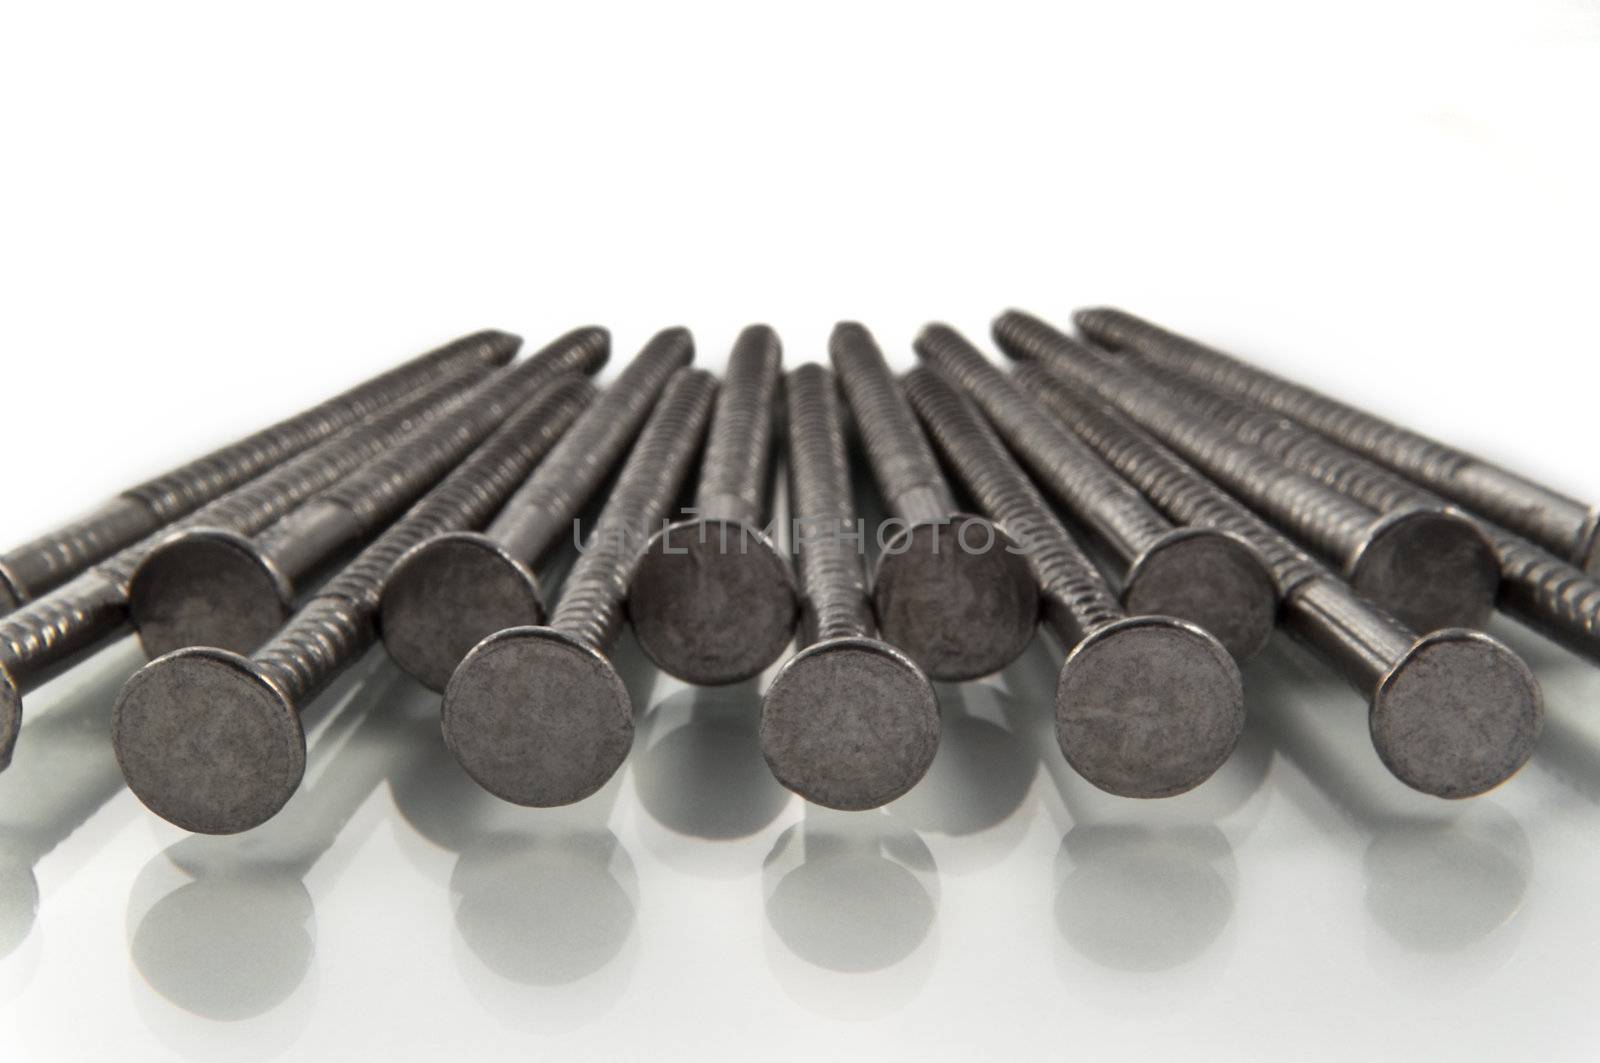 Close and low level of the heads of a number of steel nails arranged in a repetitive pattern.